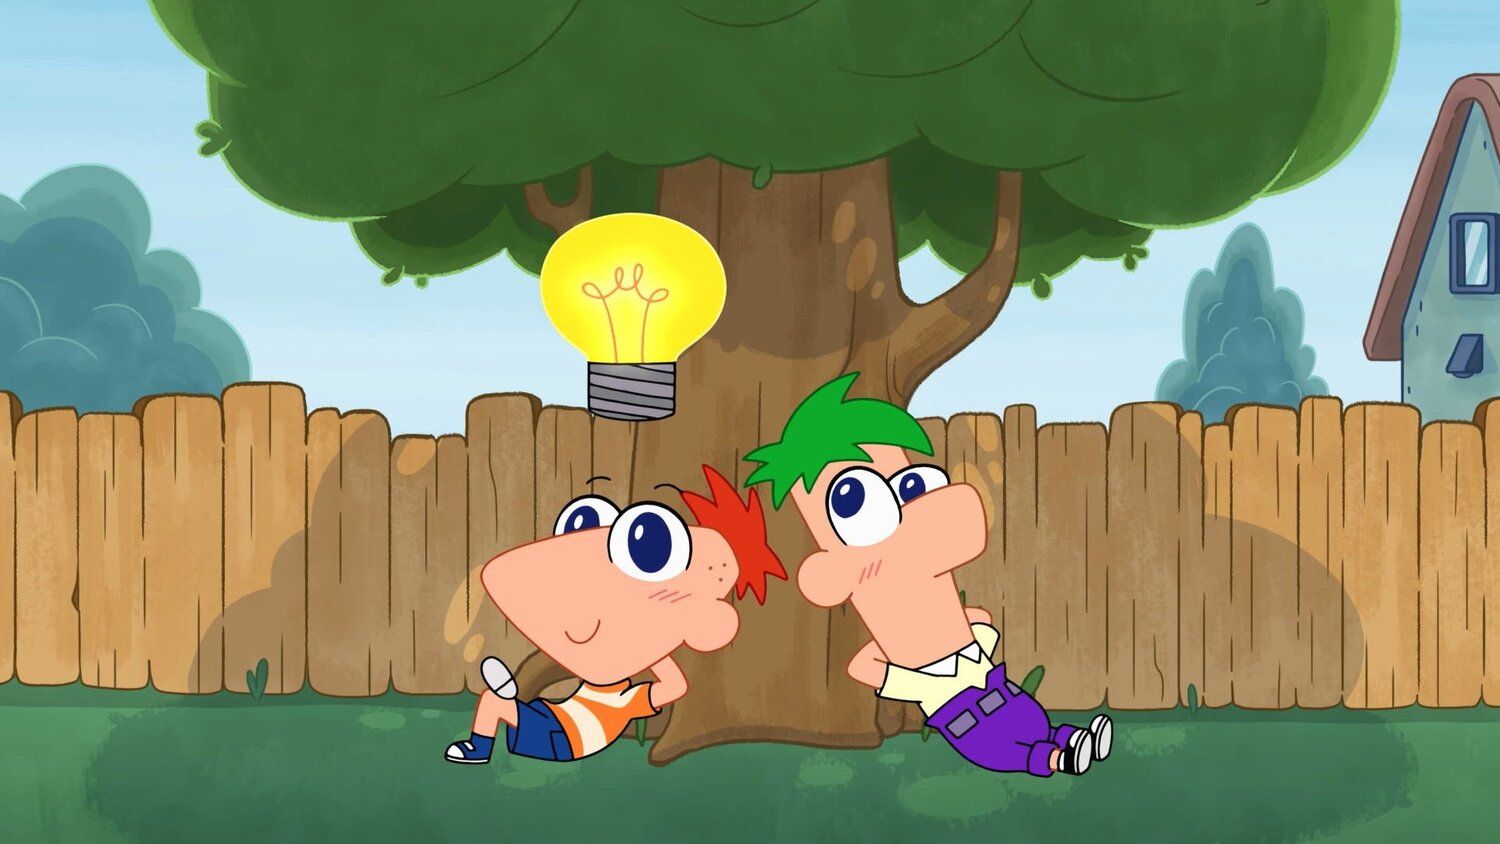 Exclusive: Disney Is Releasing PHINEAS AND FERB Chibi Shorts That Are Too Adorable